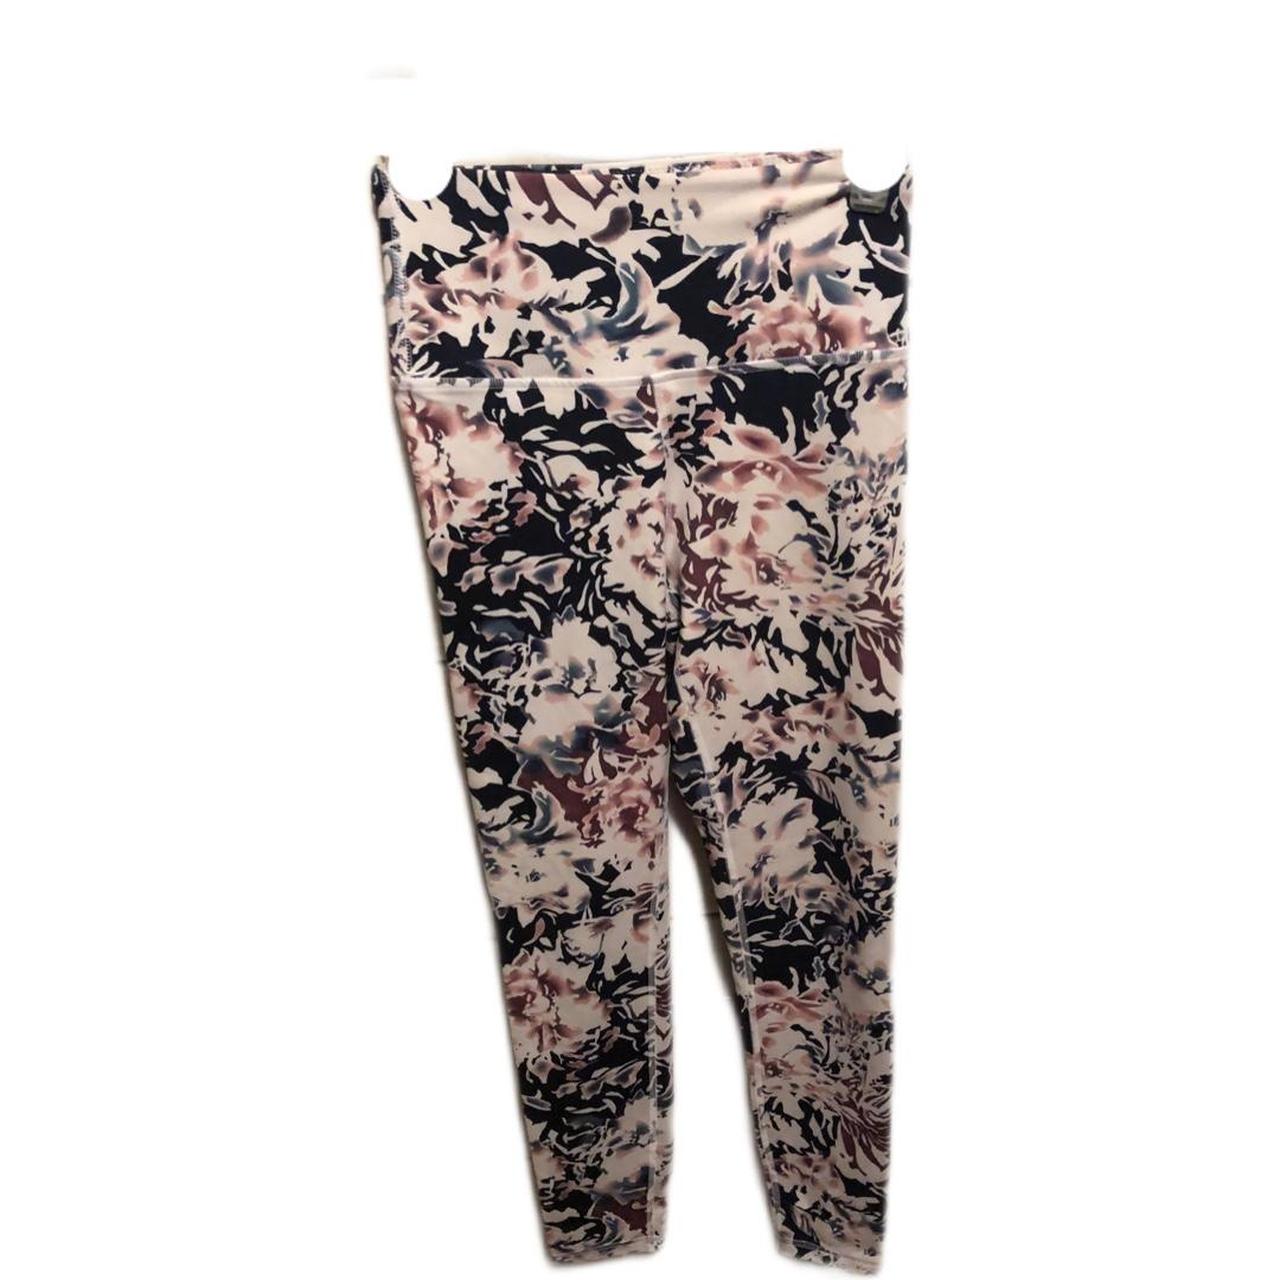 Balance Collection Lux Contender Leggings